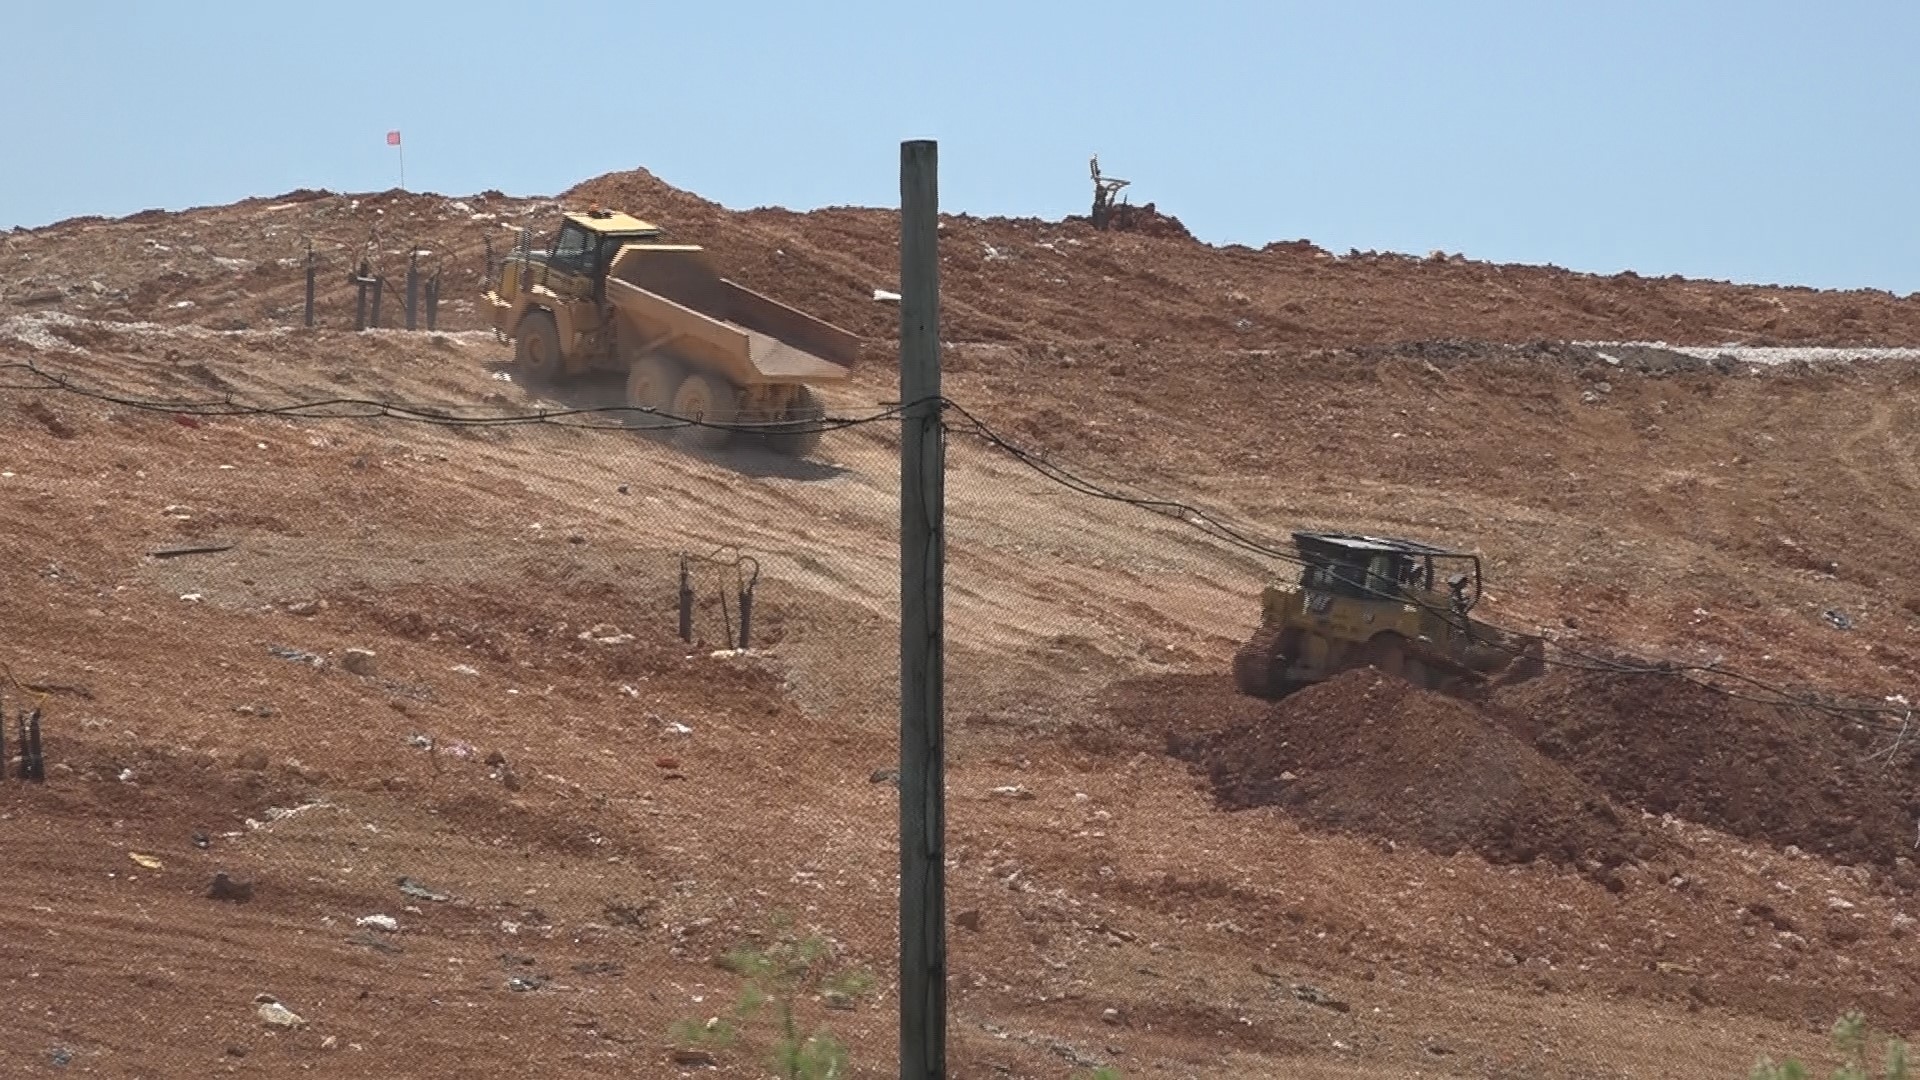 The Eco-Vista landfill in Tontitown is moving ahead with its expansion after getting the go-ahead from an Arkansas commission.